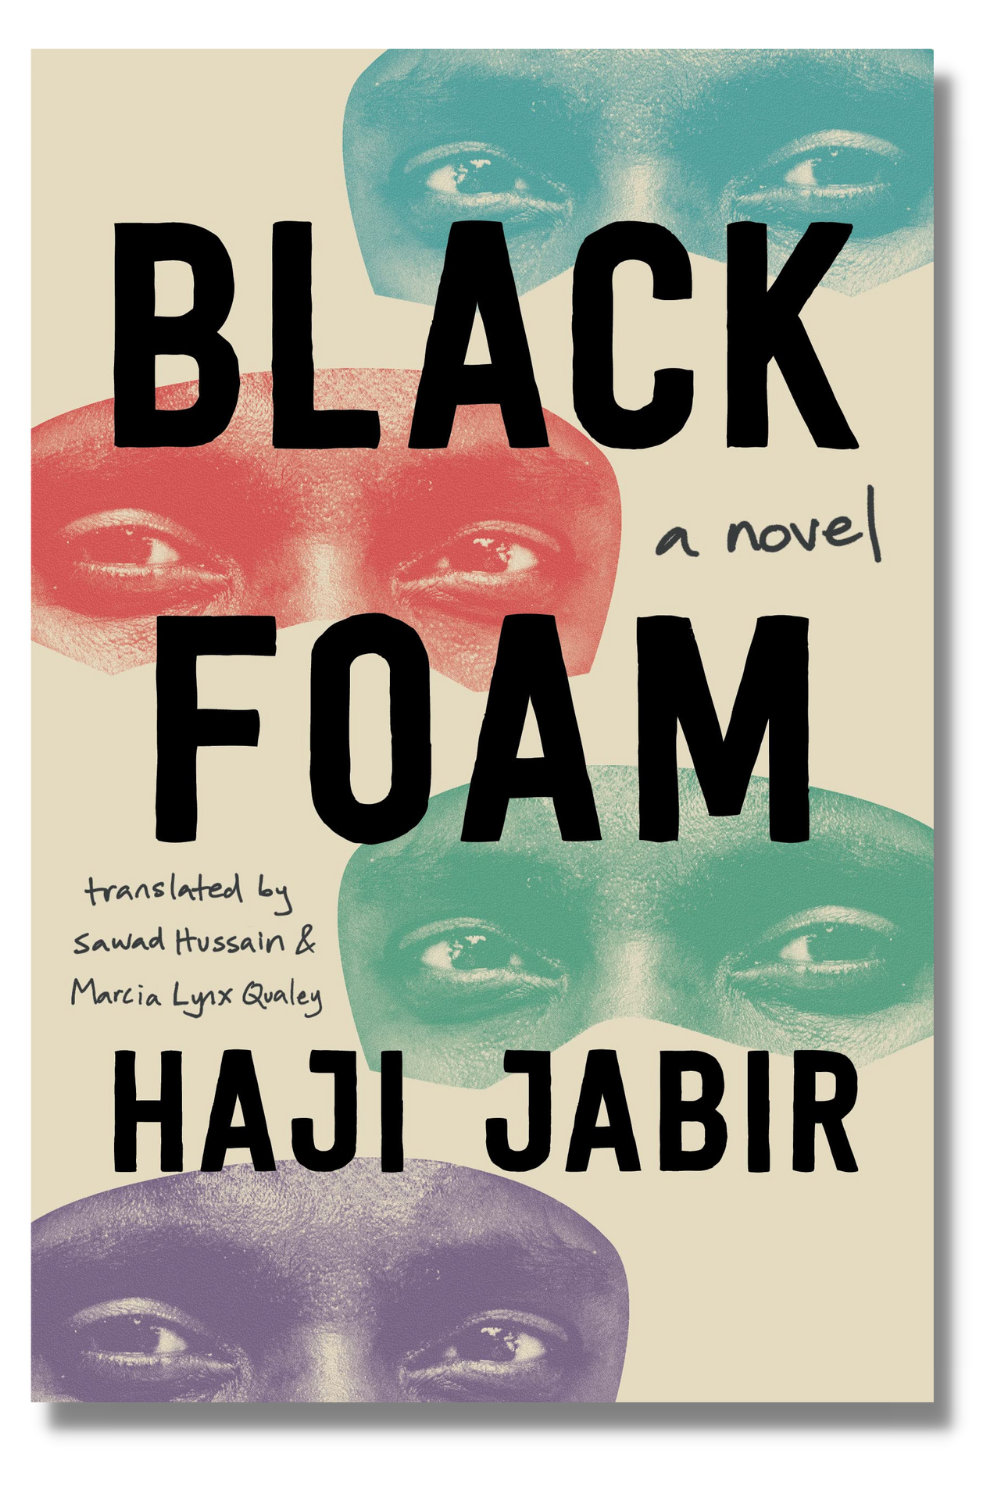 The cover of "Black Foam"